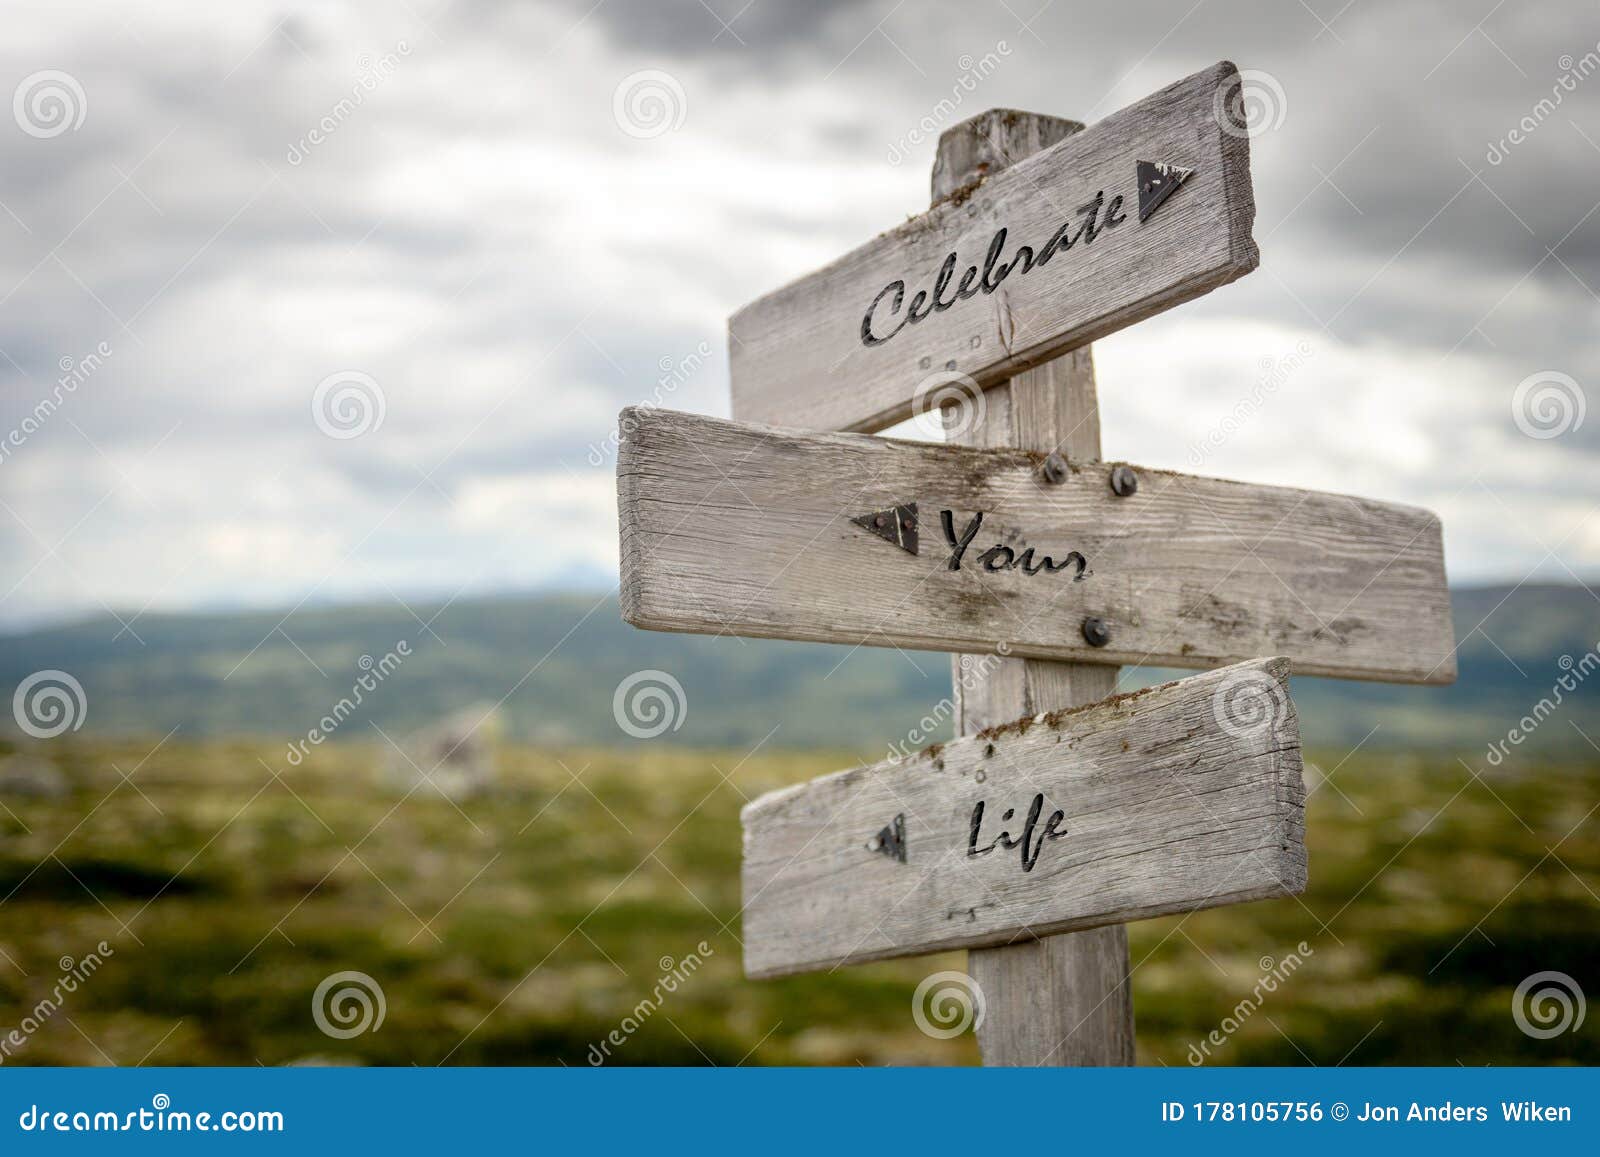 celebrate your life text on wooden signpost outdoors